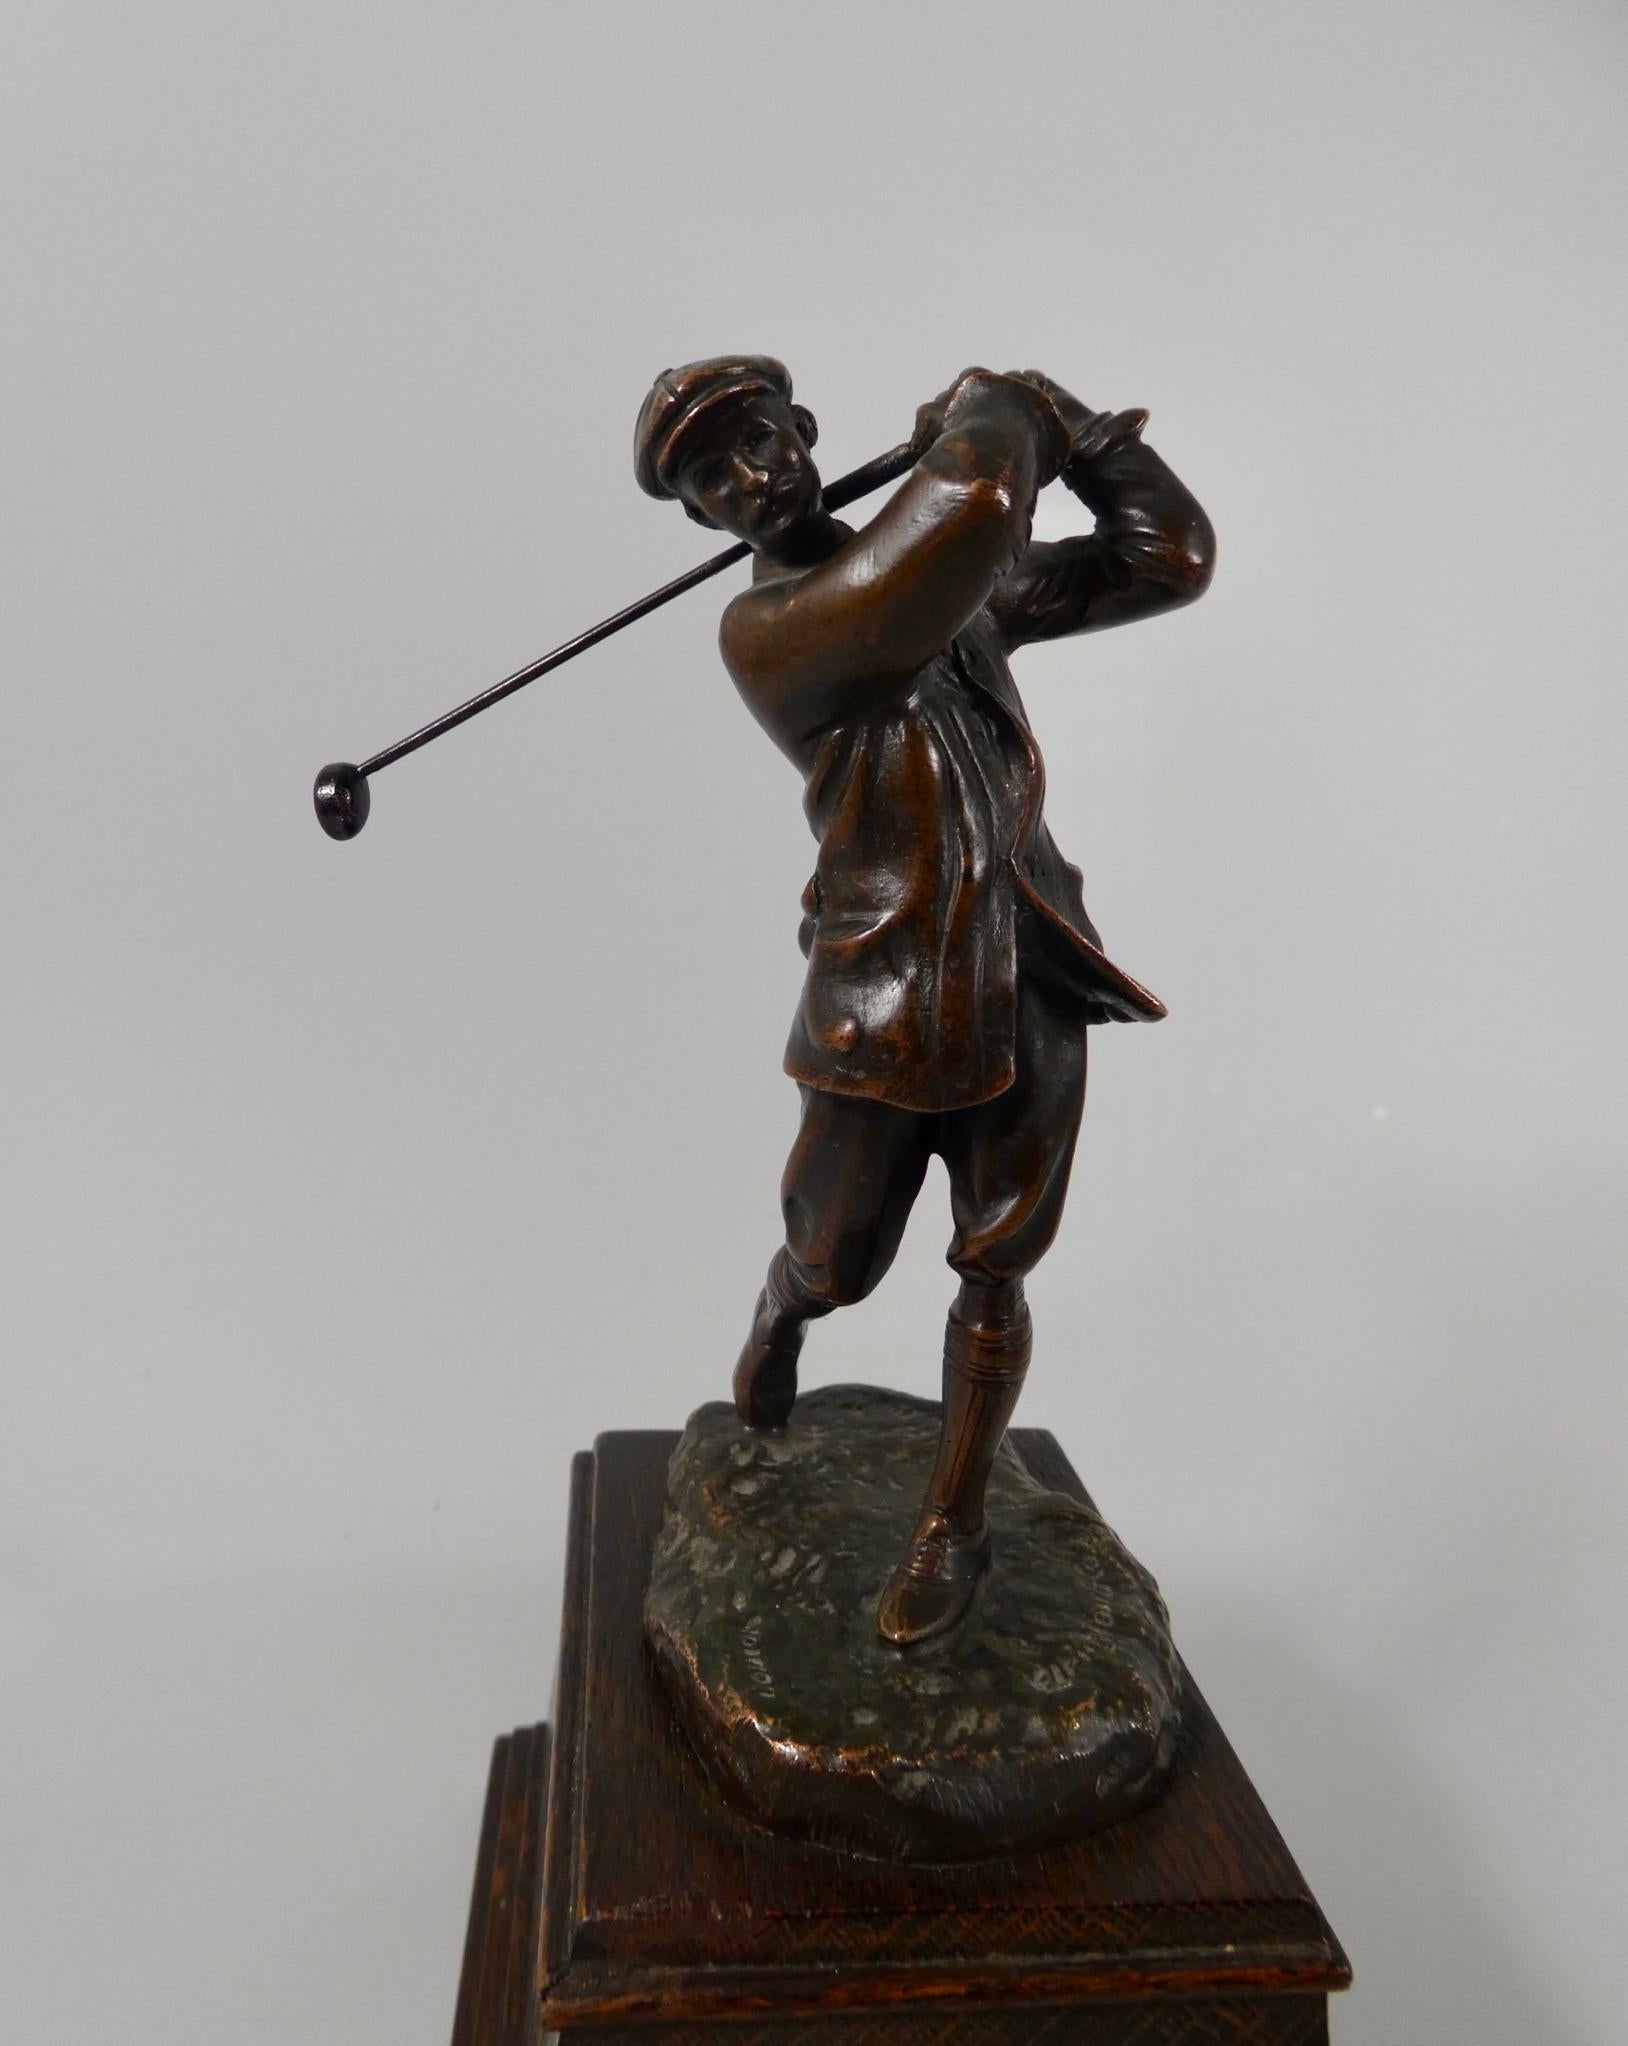 A bronze figure of the golfer Harry Vardon, modelled by Hal Ludlow, for Elkington and Co., c. 1920. Well modelled as the famous golfer, at the top of his back-swing. Standing upon a grassy mound base, and set upon its original wood plinth.
Signed -